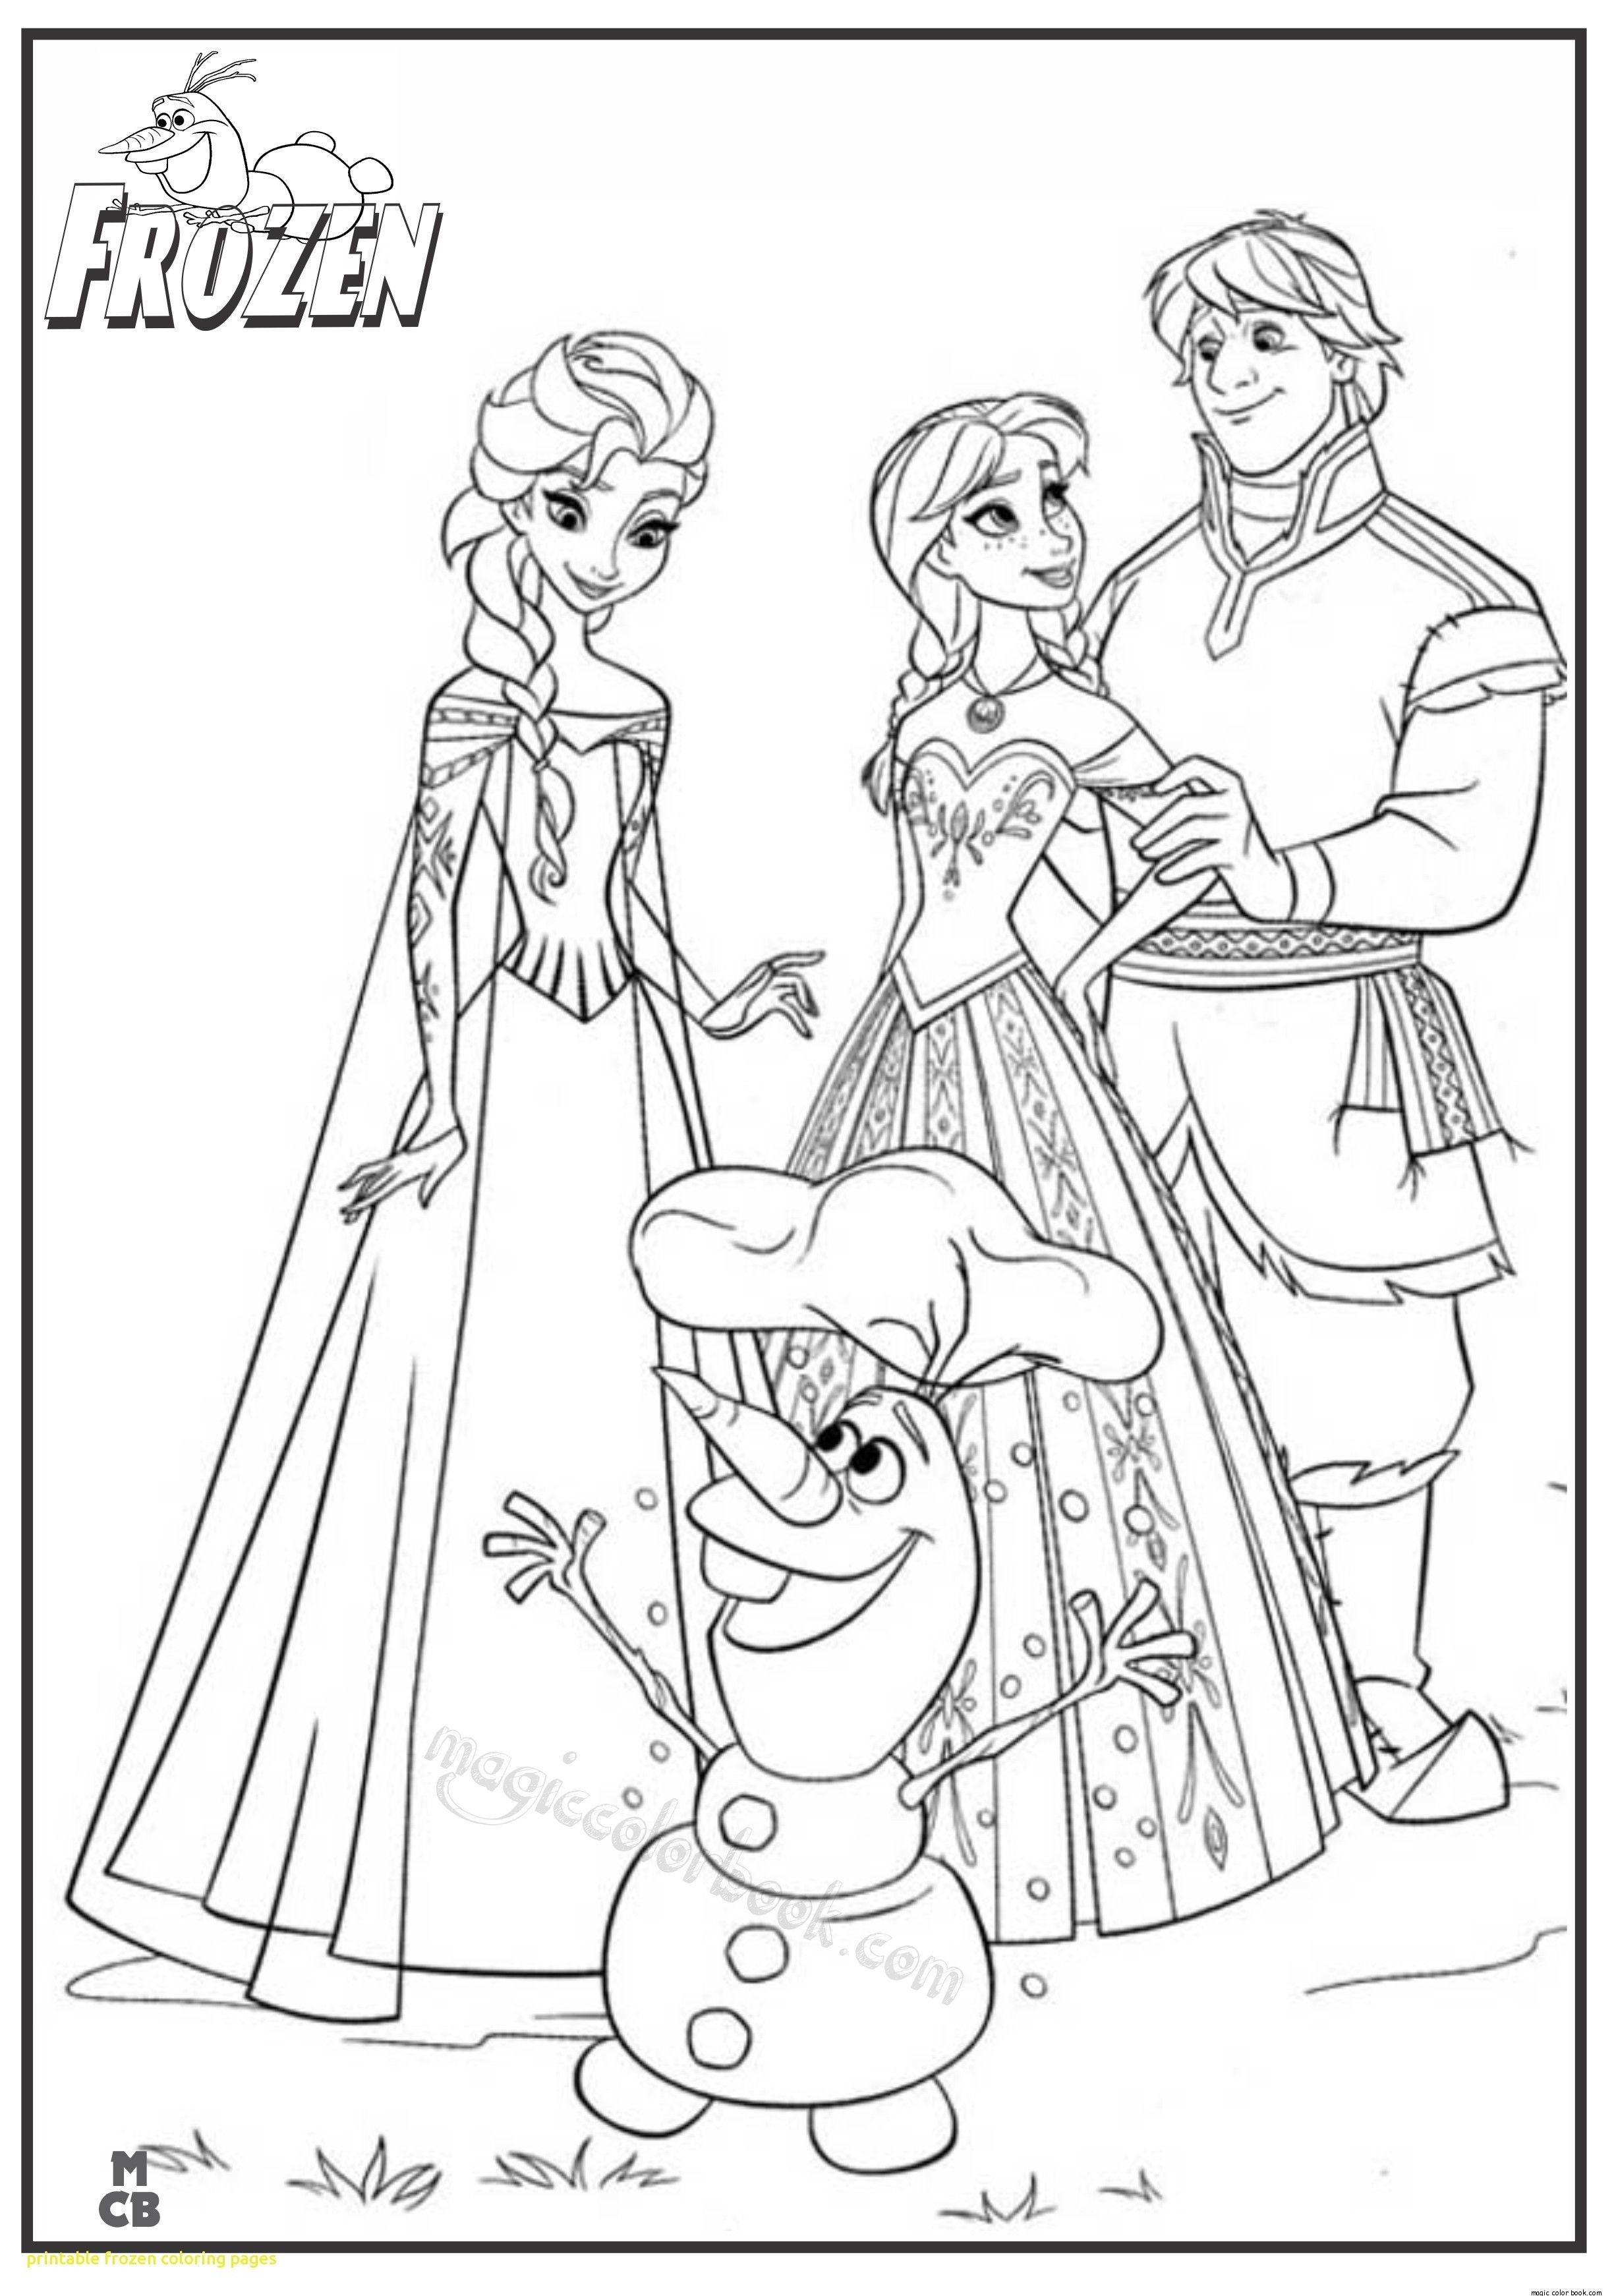 Awesome Frozen Coloring Pages Kristoff | Jvzooreview - Free Printable Frozen Coloring Pages